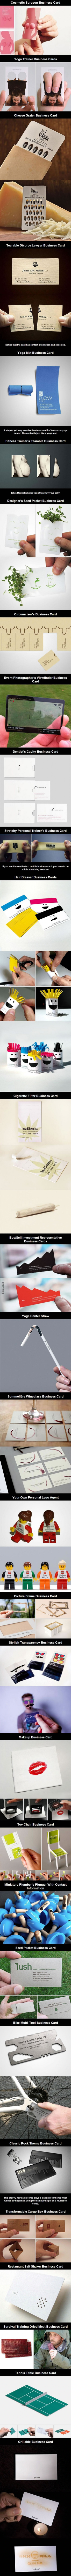 30 Most Creative Business Cards That Will Leave You Amazed